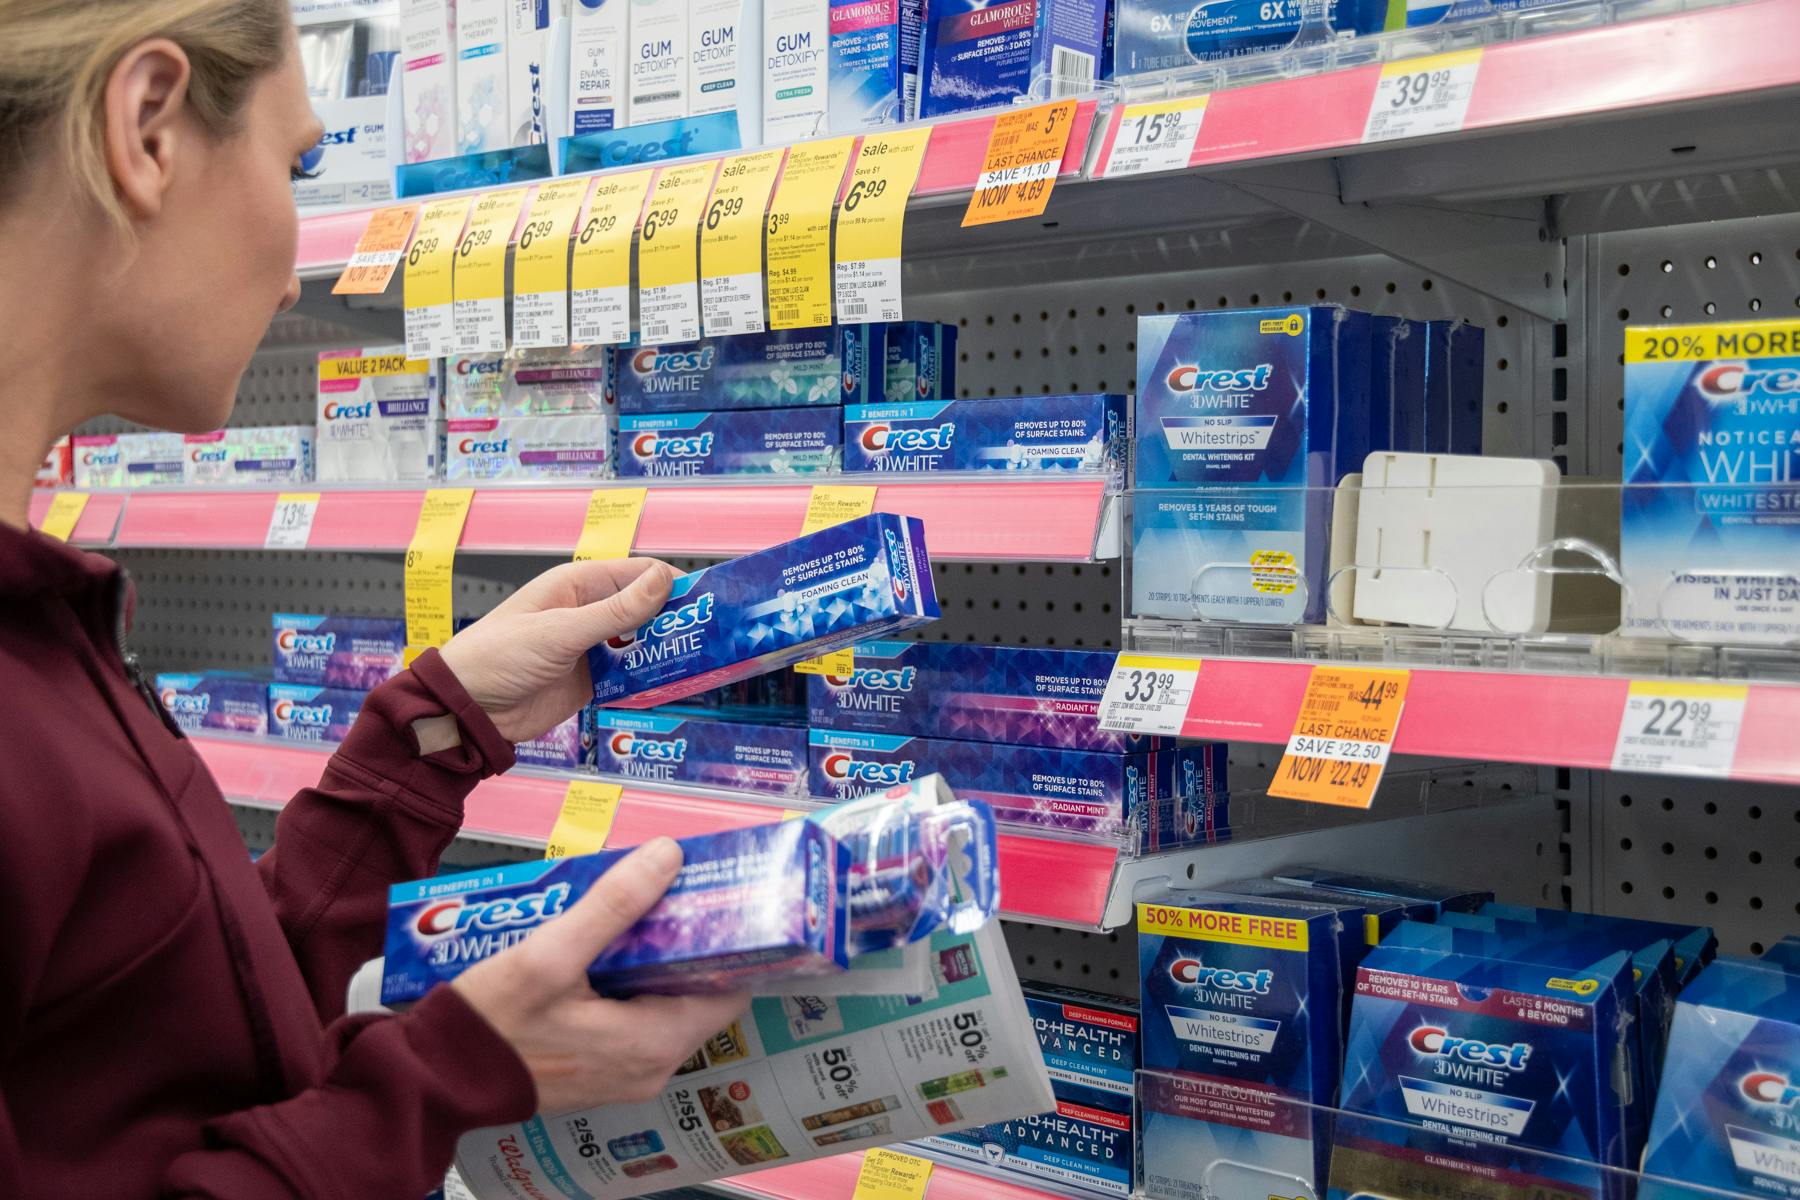 A woman grabbing toothpaste from a walgreen's store shelf with an ad in hand